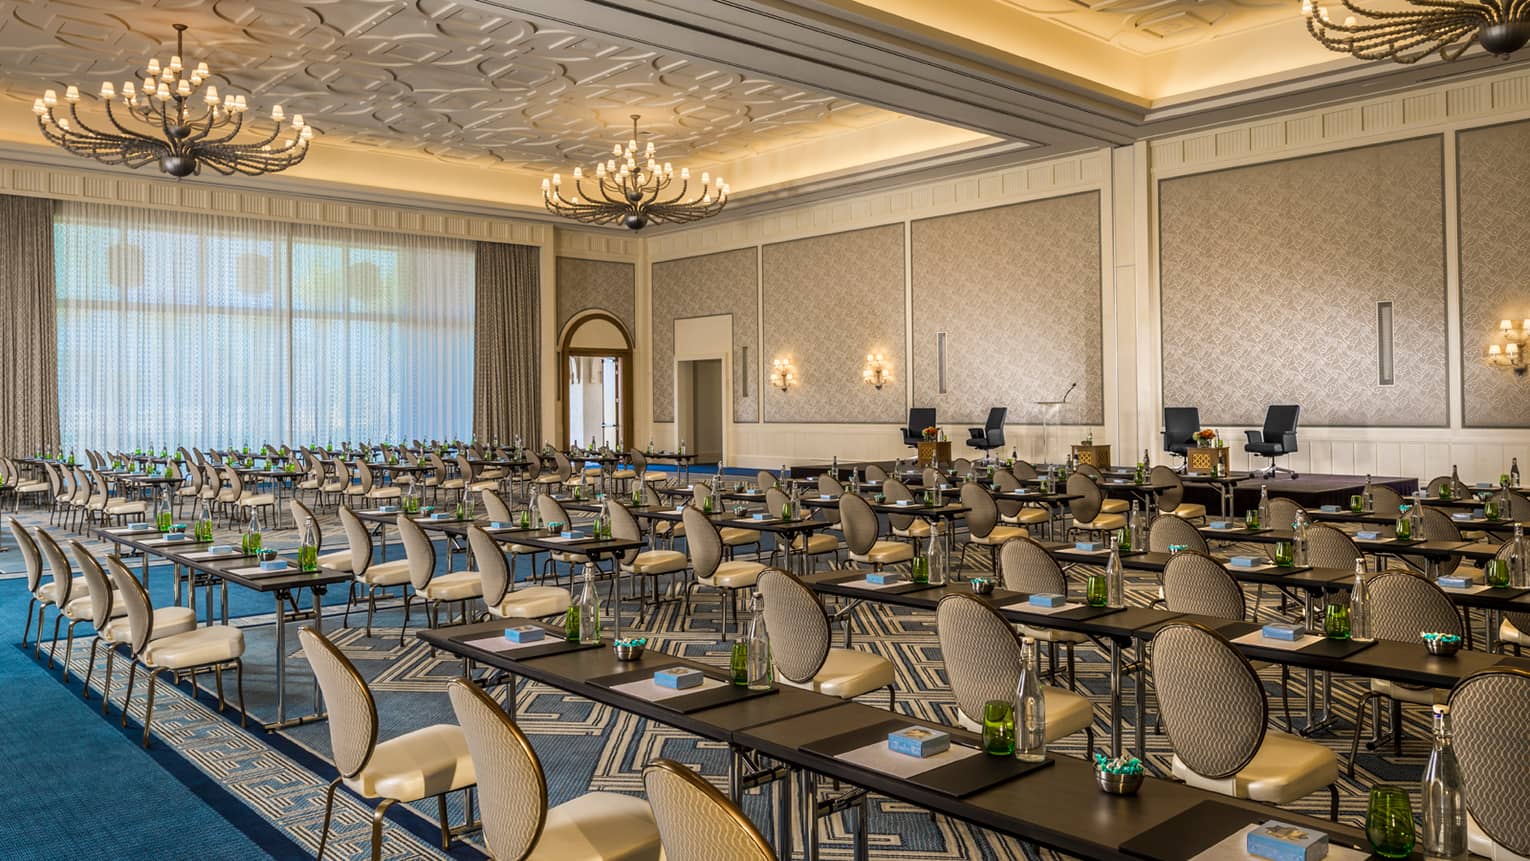 Rows of chairs, meeting tables in large Dana ballroom event space with high ceilings, chandeliers